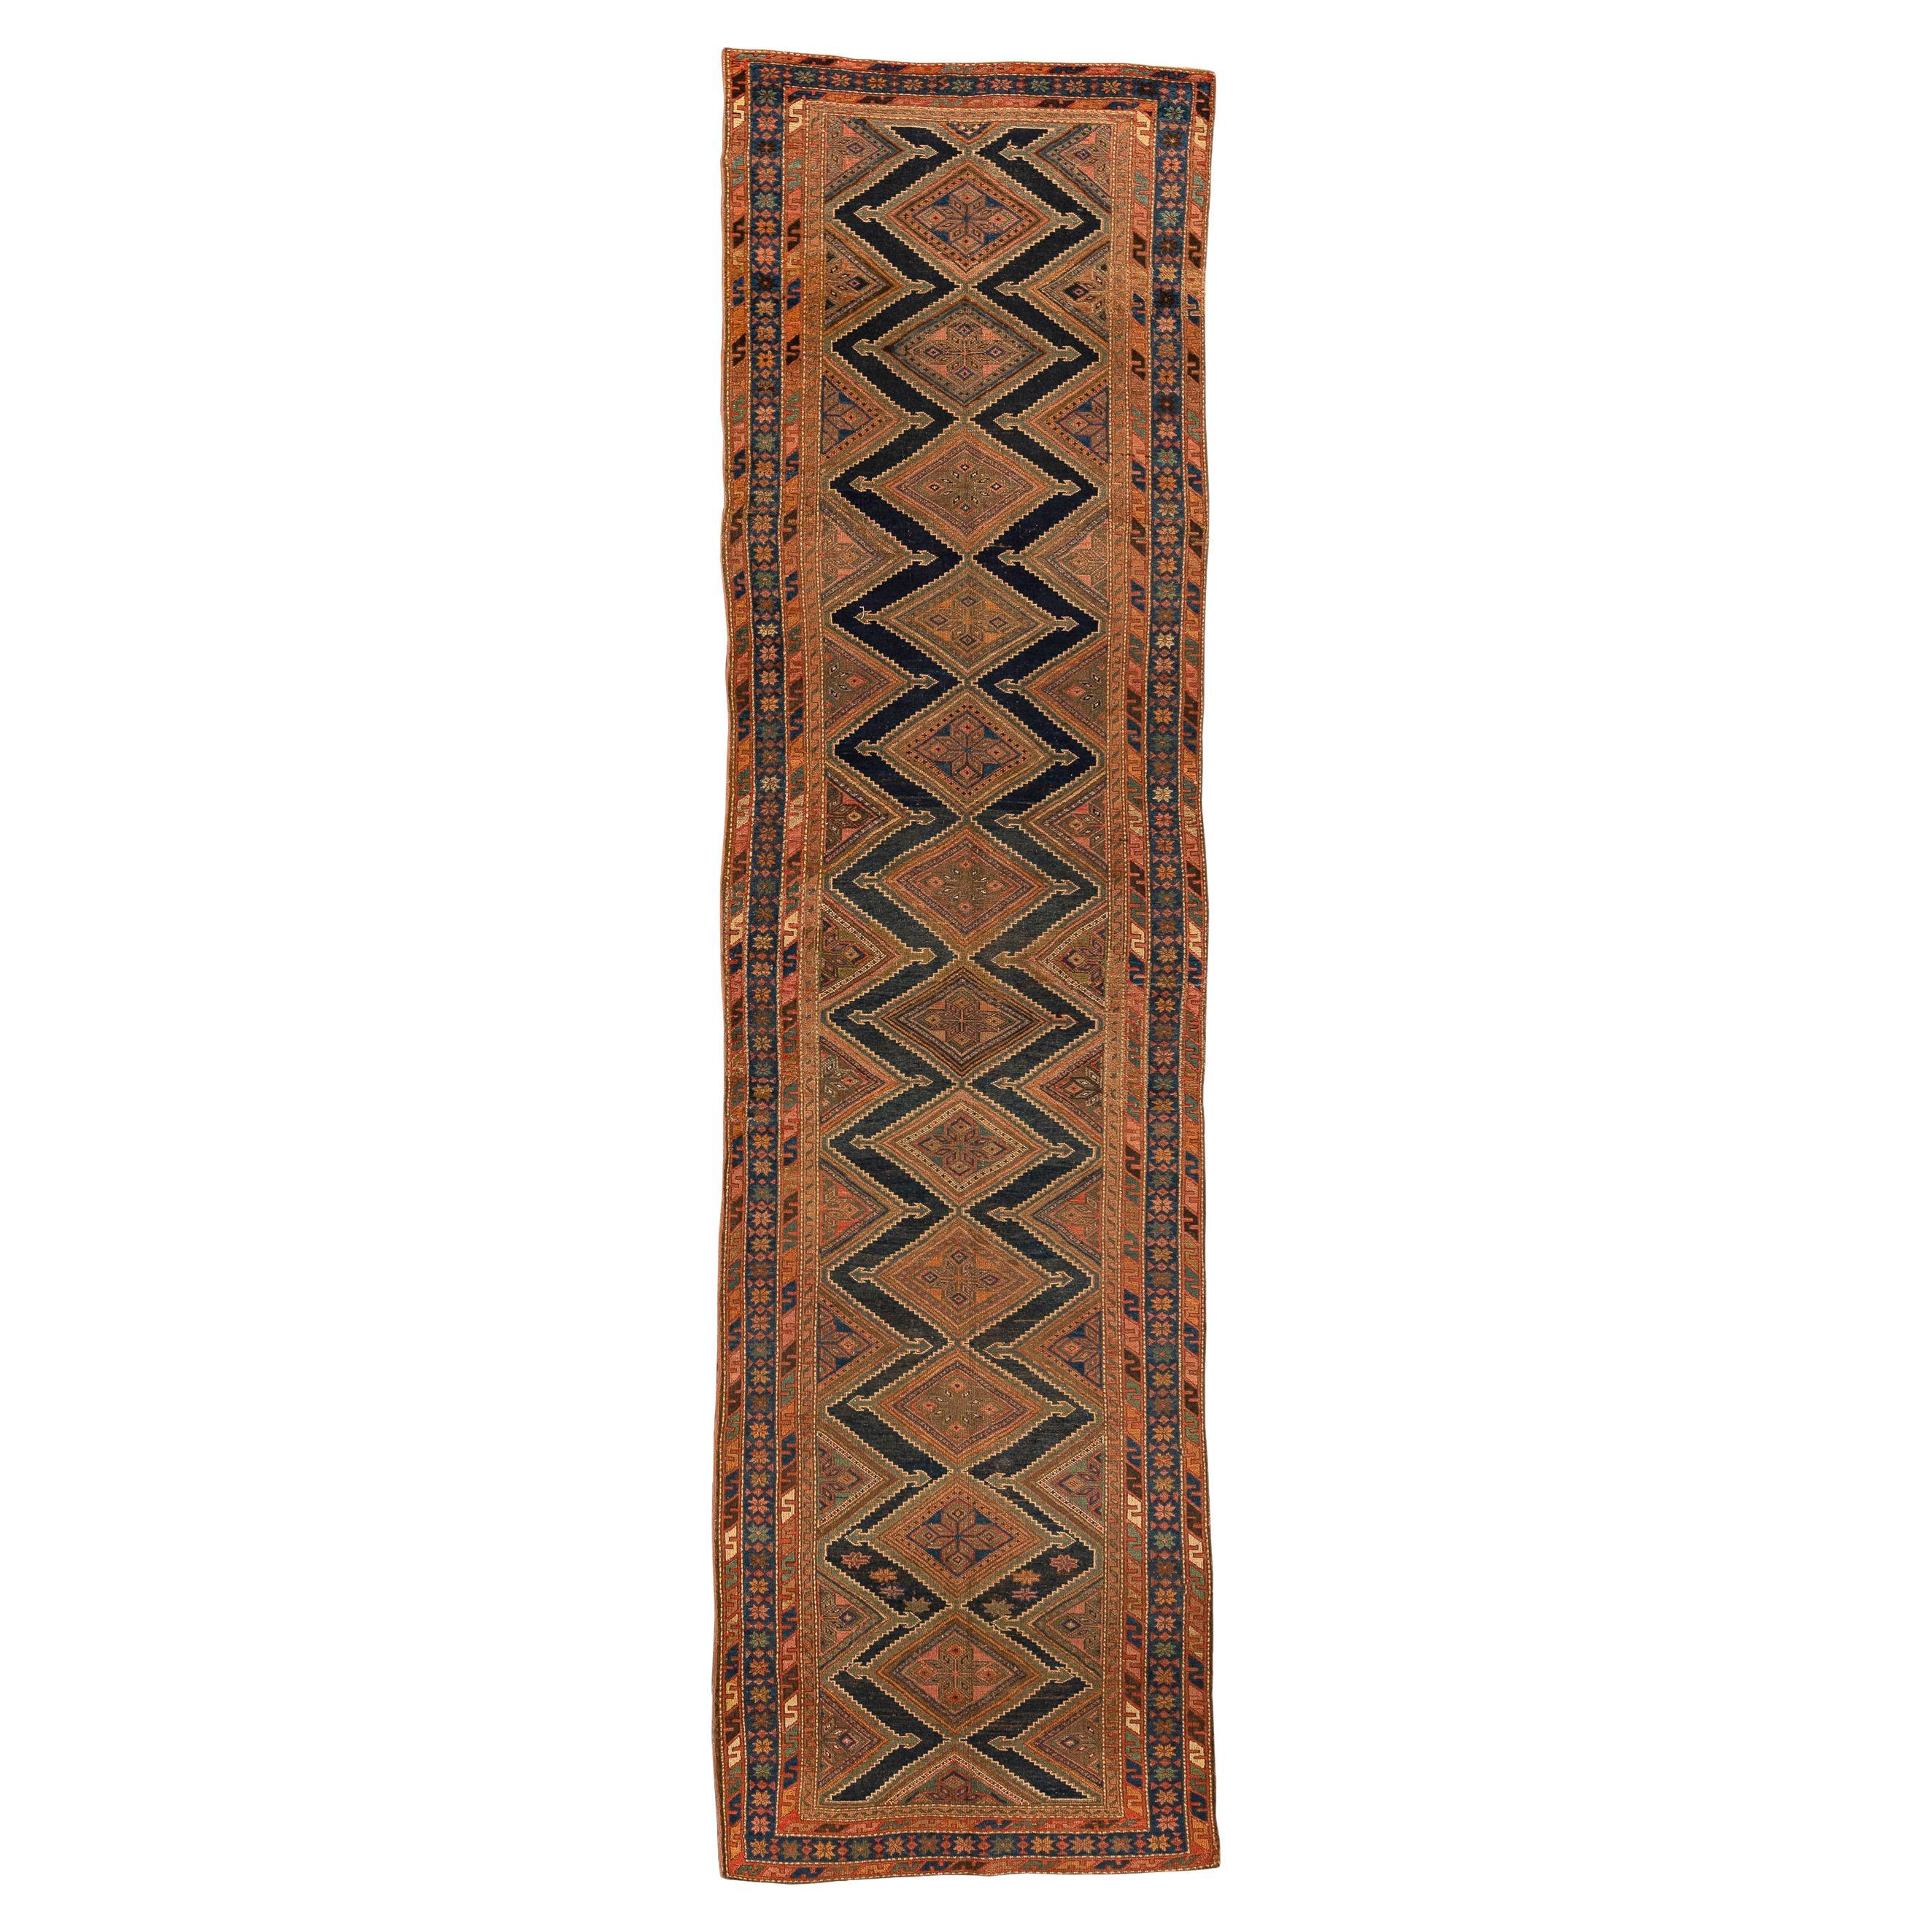 Kurdish – Northwest Persia

Twelve lozenge-shaped medallions with serrated borders and arrowheads are aligned over an abrashed navy blue field. The medallions are incomplete at the bottom and top of the rug, interrupted by the borders, giving a